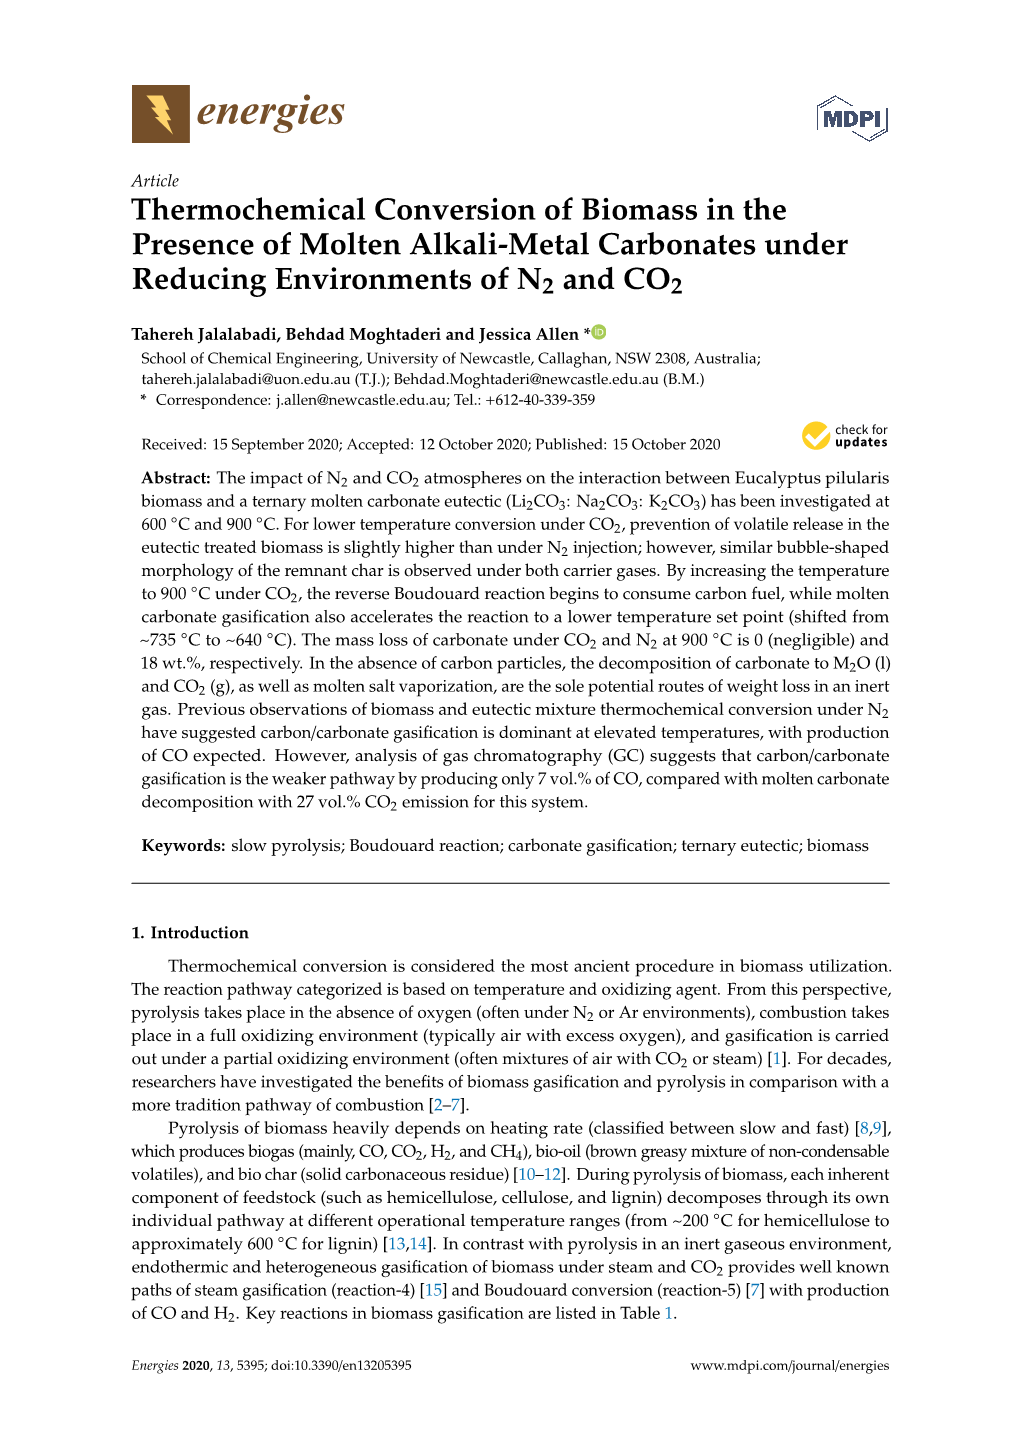 Thermochemical Conversion of Biomass in the Presence of Molten Alkali-Metal Carbonates Under Reducing Environments of N2 and CO2